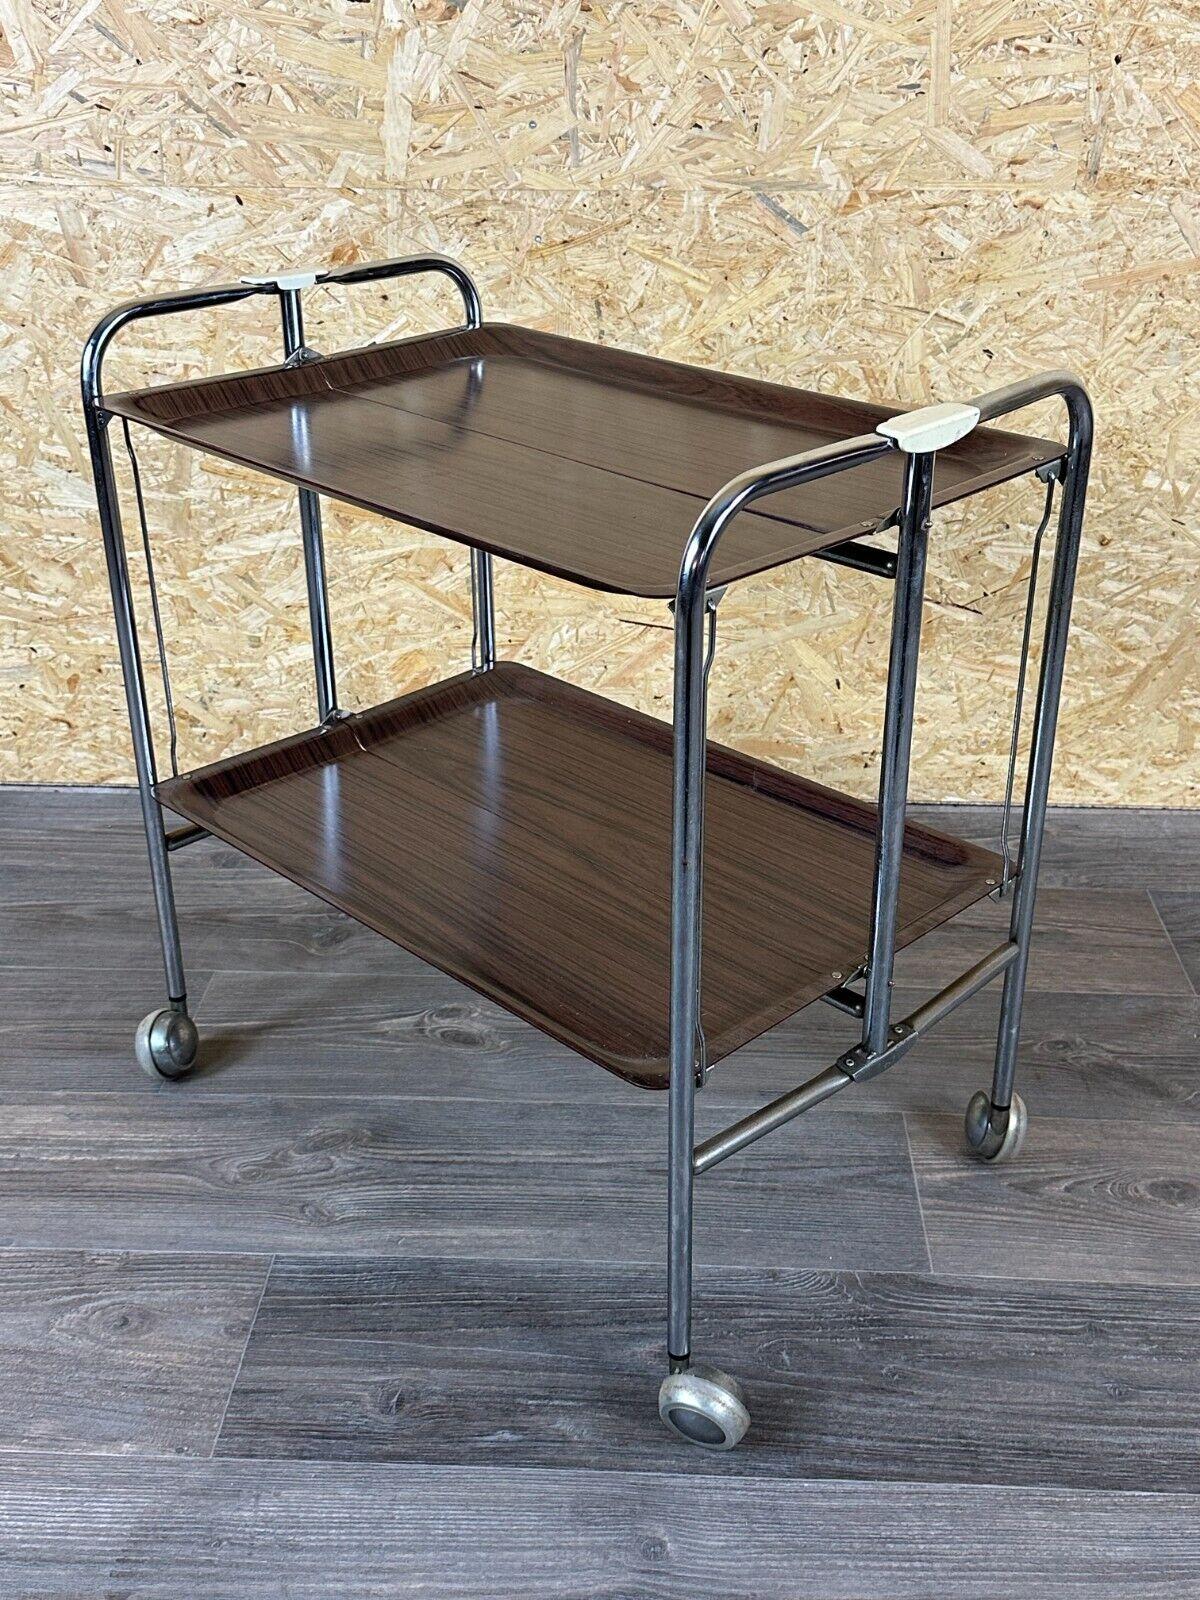 60s 70s serving trolley dinette side table space age brown design im Angebot 7